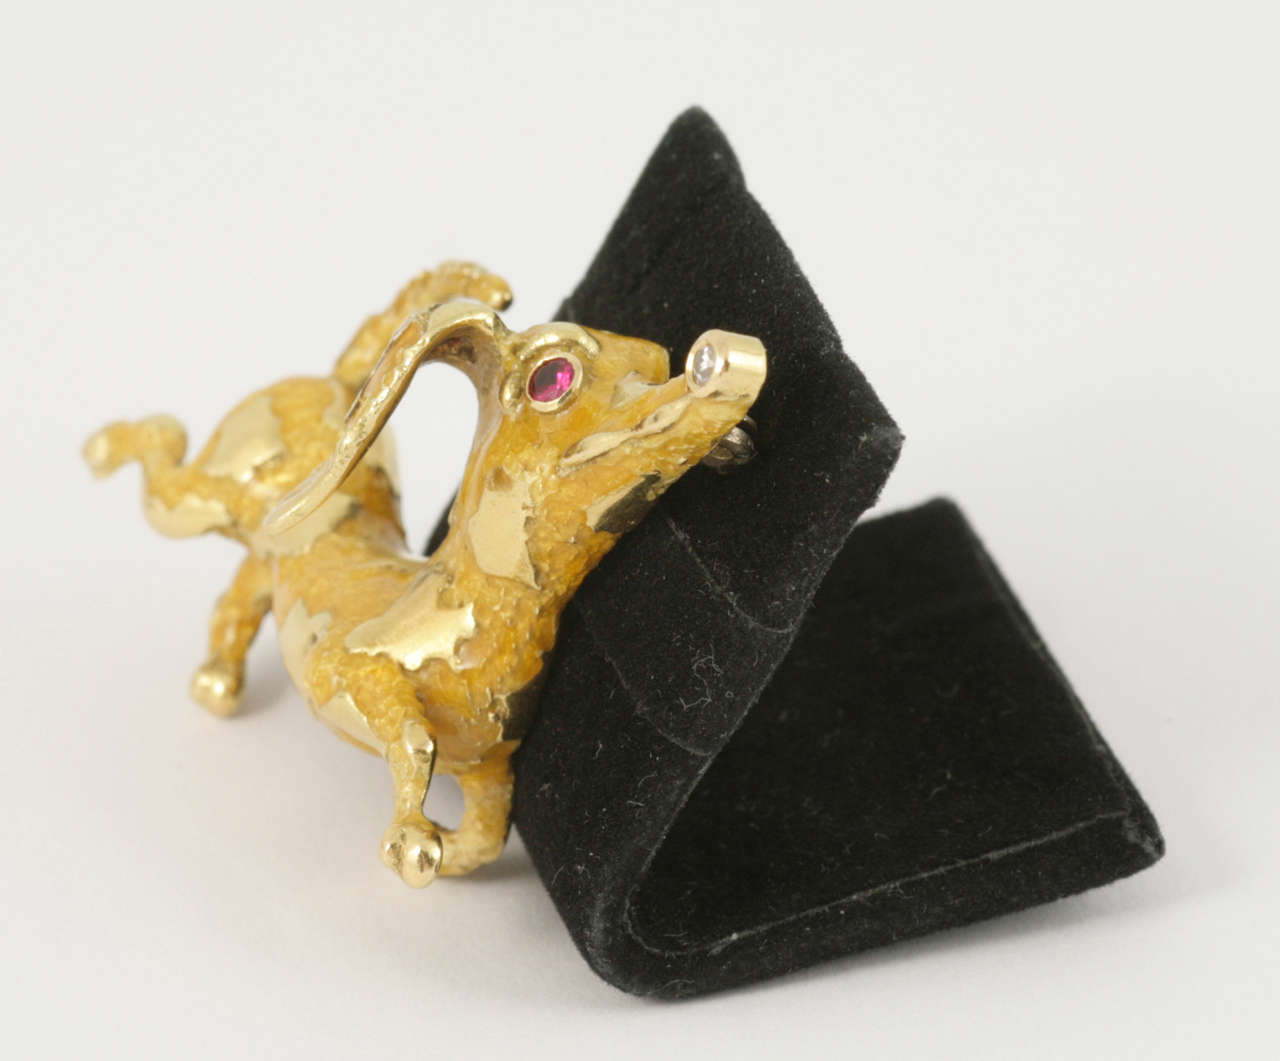 A cheeky dachshund brooch by Frascarolo. 
The sausage dog has a 18 carat yellow gold body with yellow enamel on it. 
The eye is ruby set and the nose and ear are diamond set.